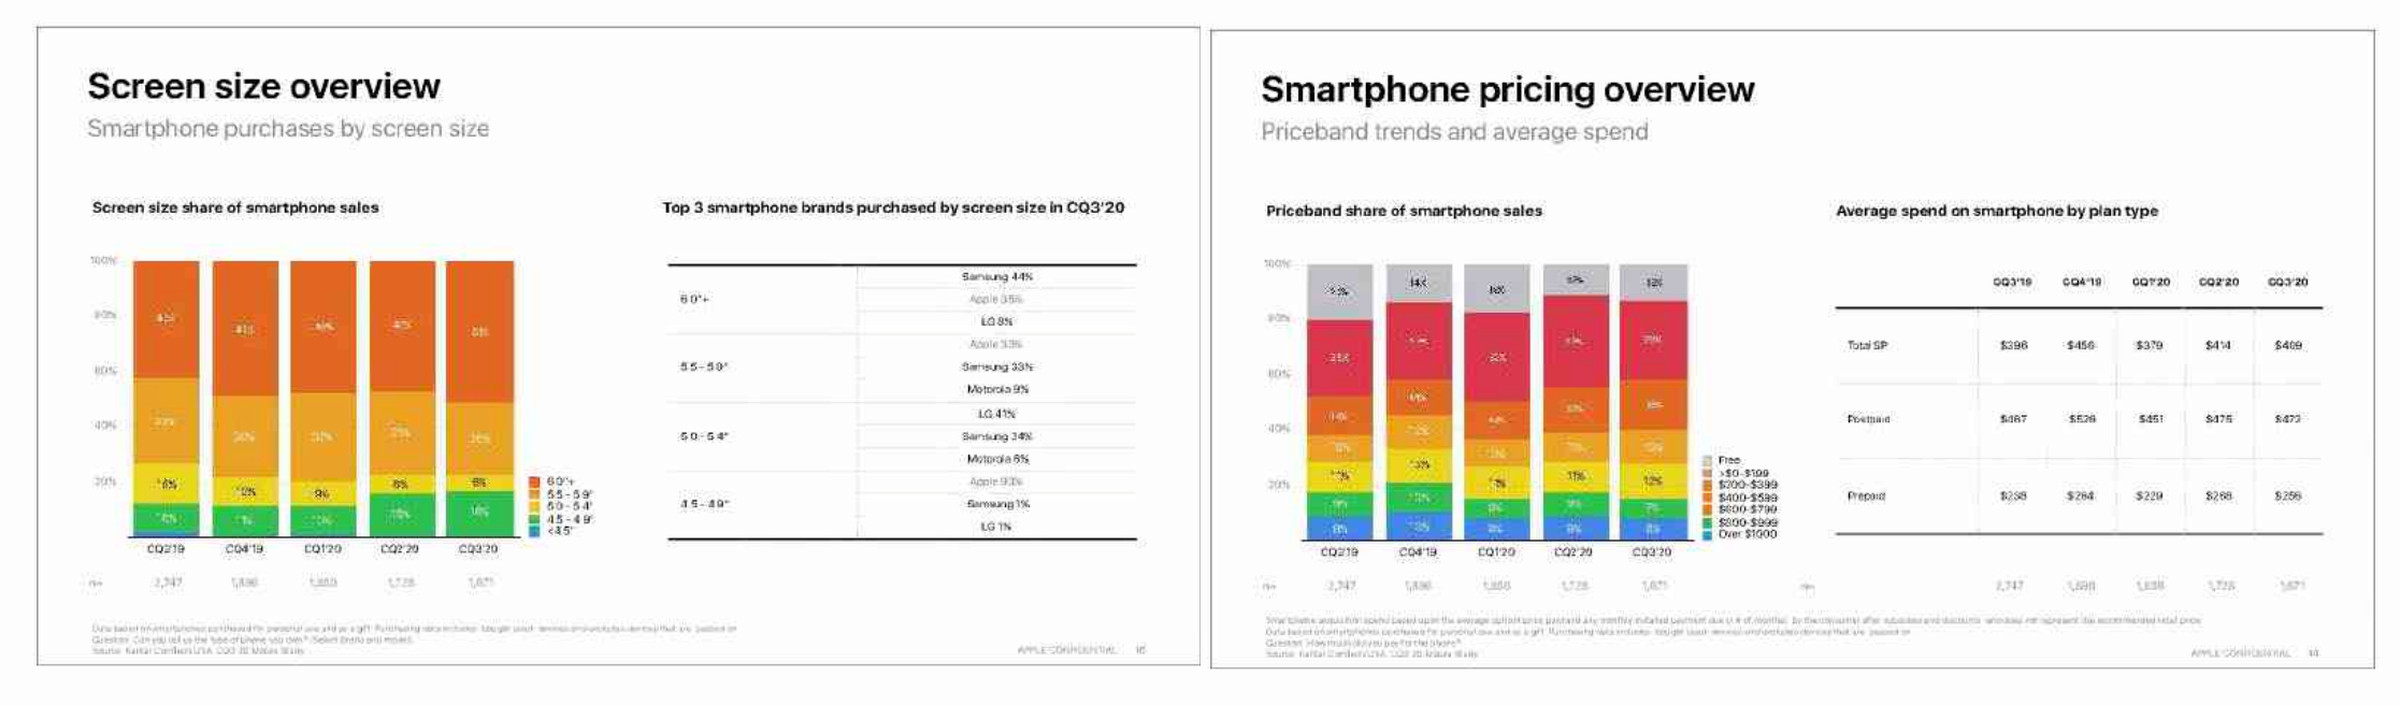 Charts from the report showing the screen size breakdown for phones sold and average price points.